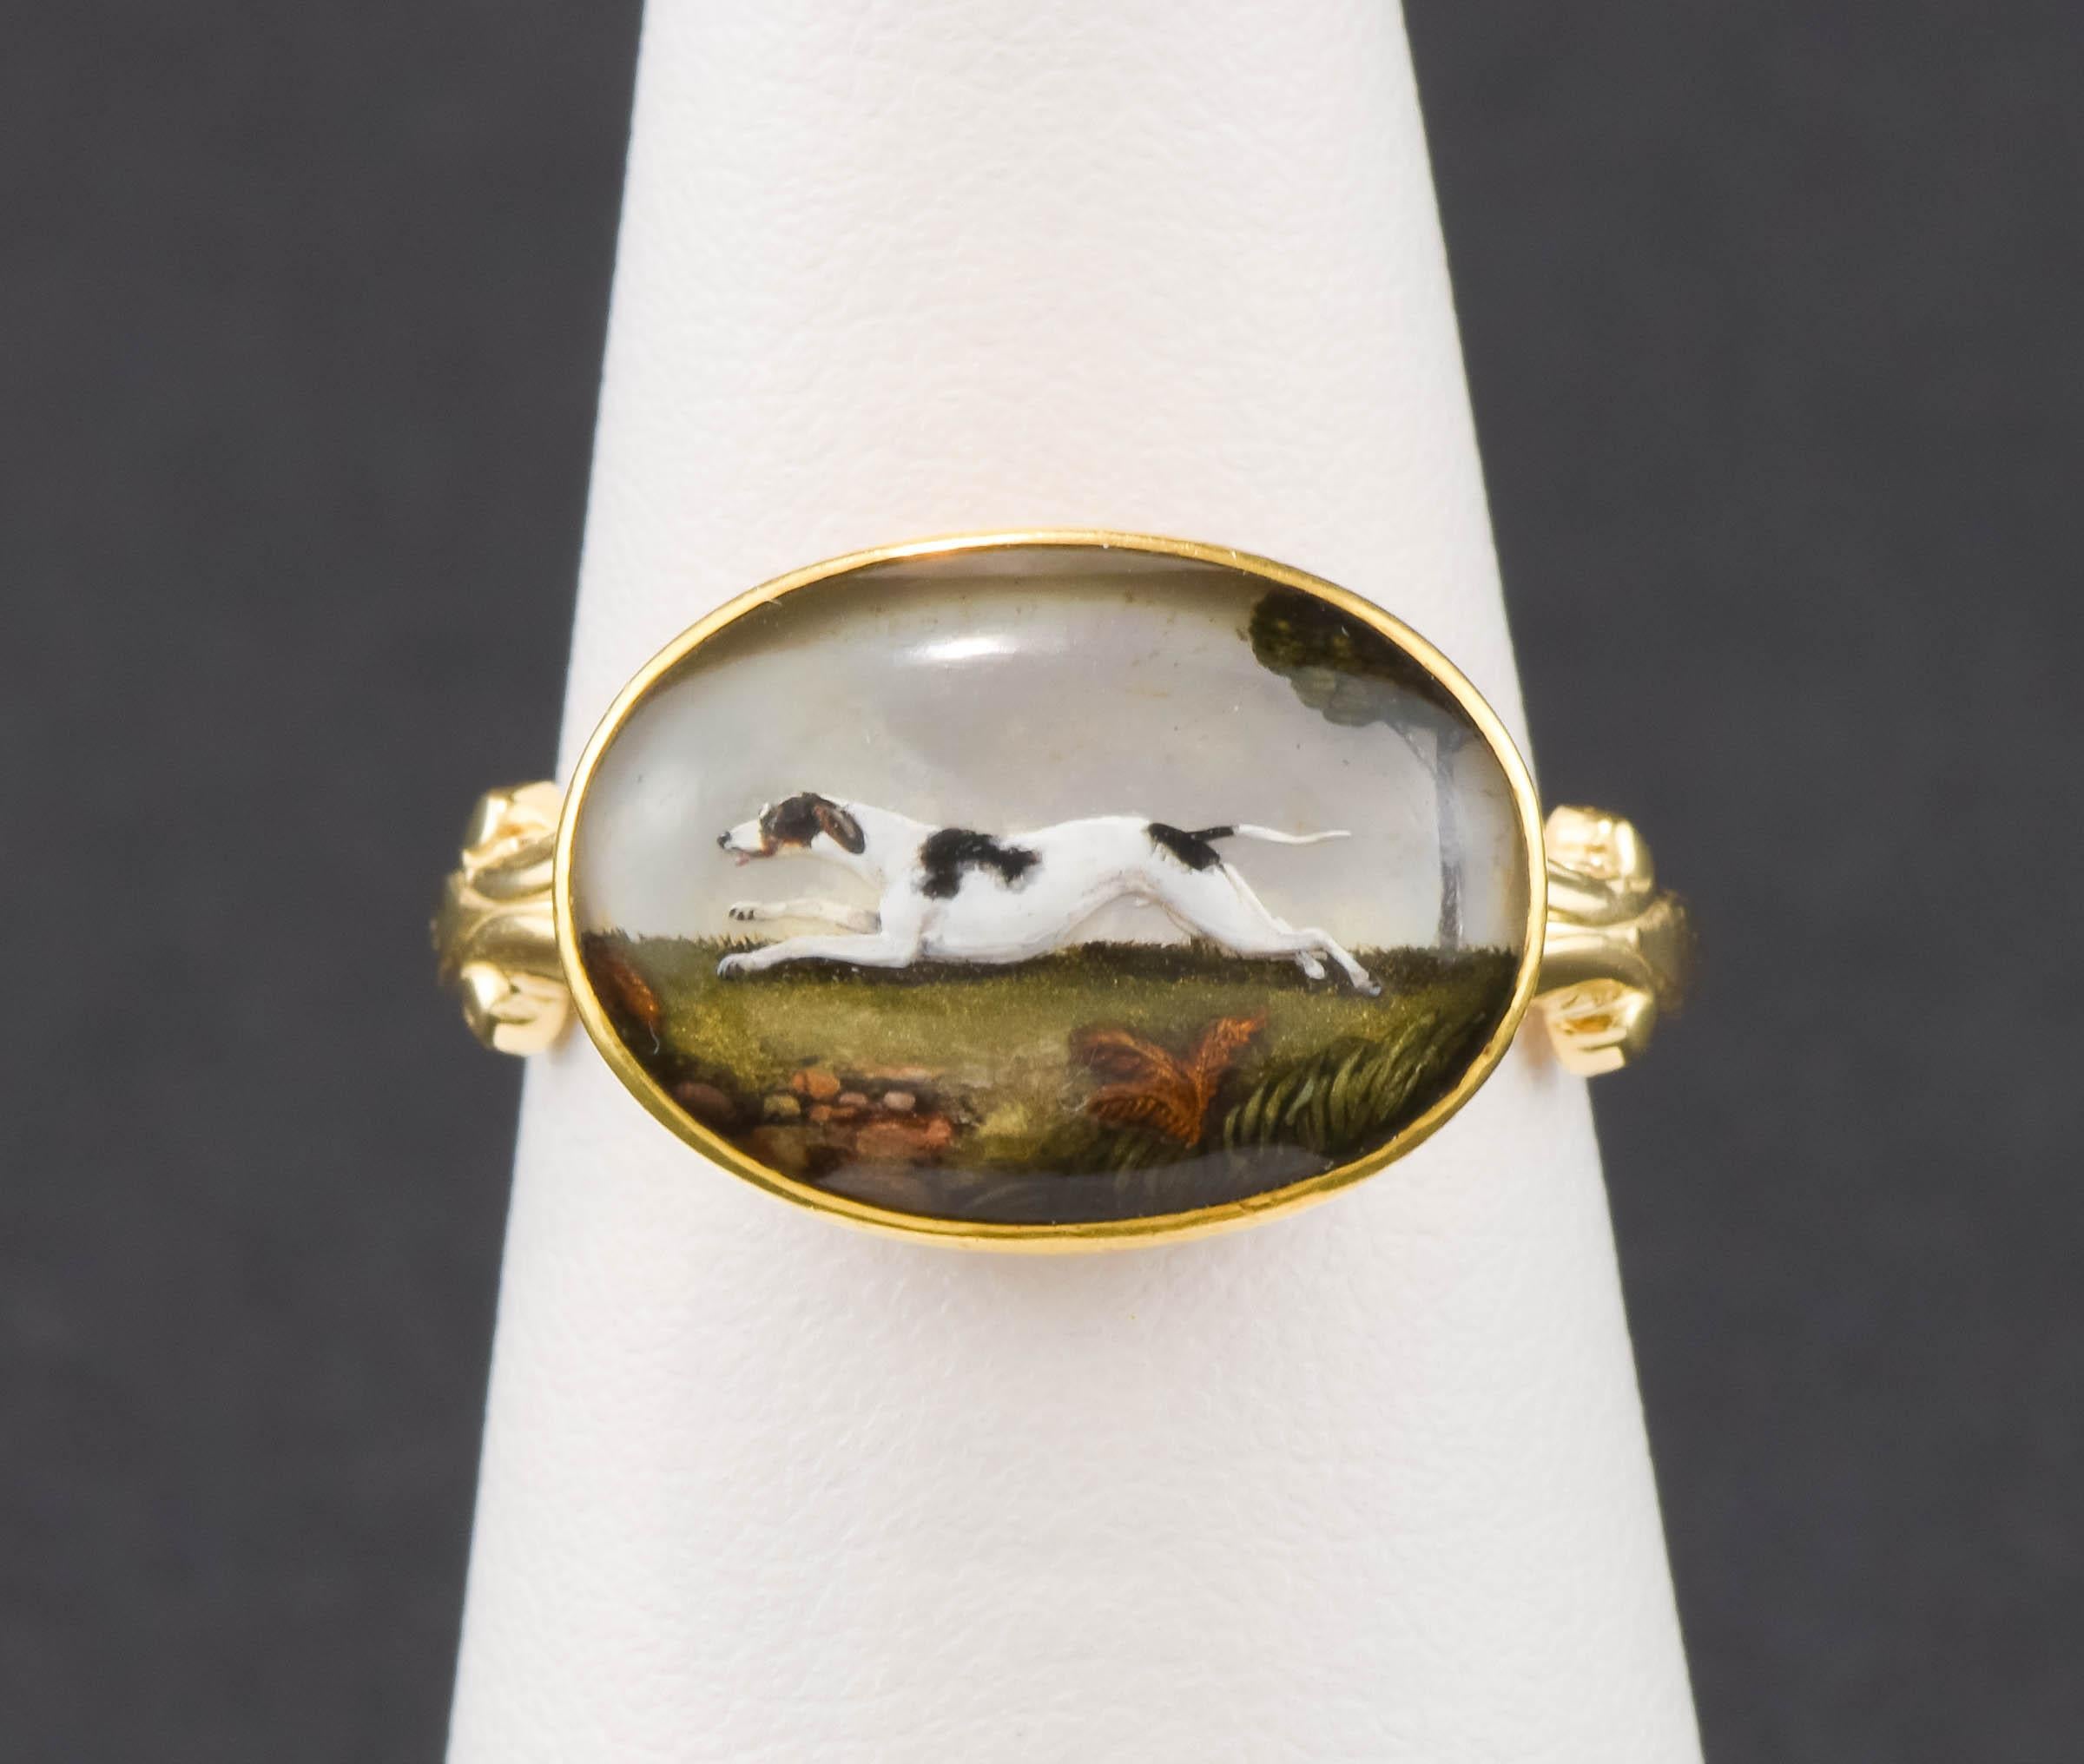 Originally part of a pair of fine Victorian 18K gold European cufflinks, this sweet running hound dog 'Essex Crystal' has been converted into a charming ring.  His brother has also been converted and will be available shortly in a separate listing